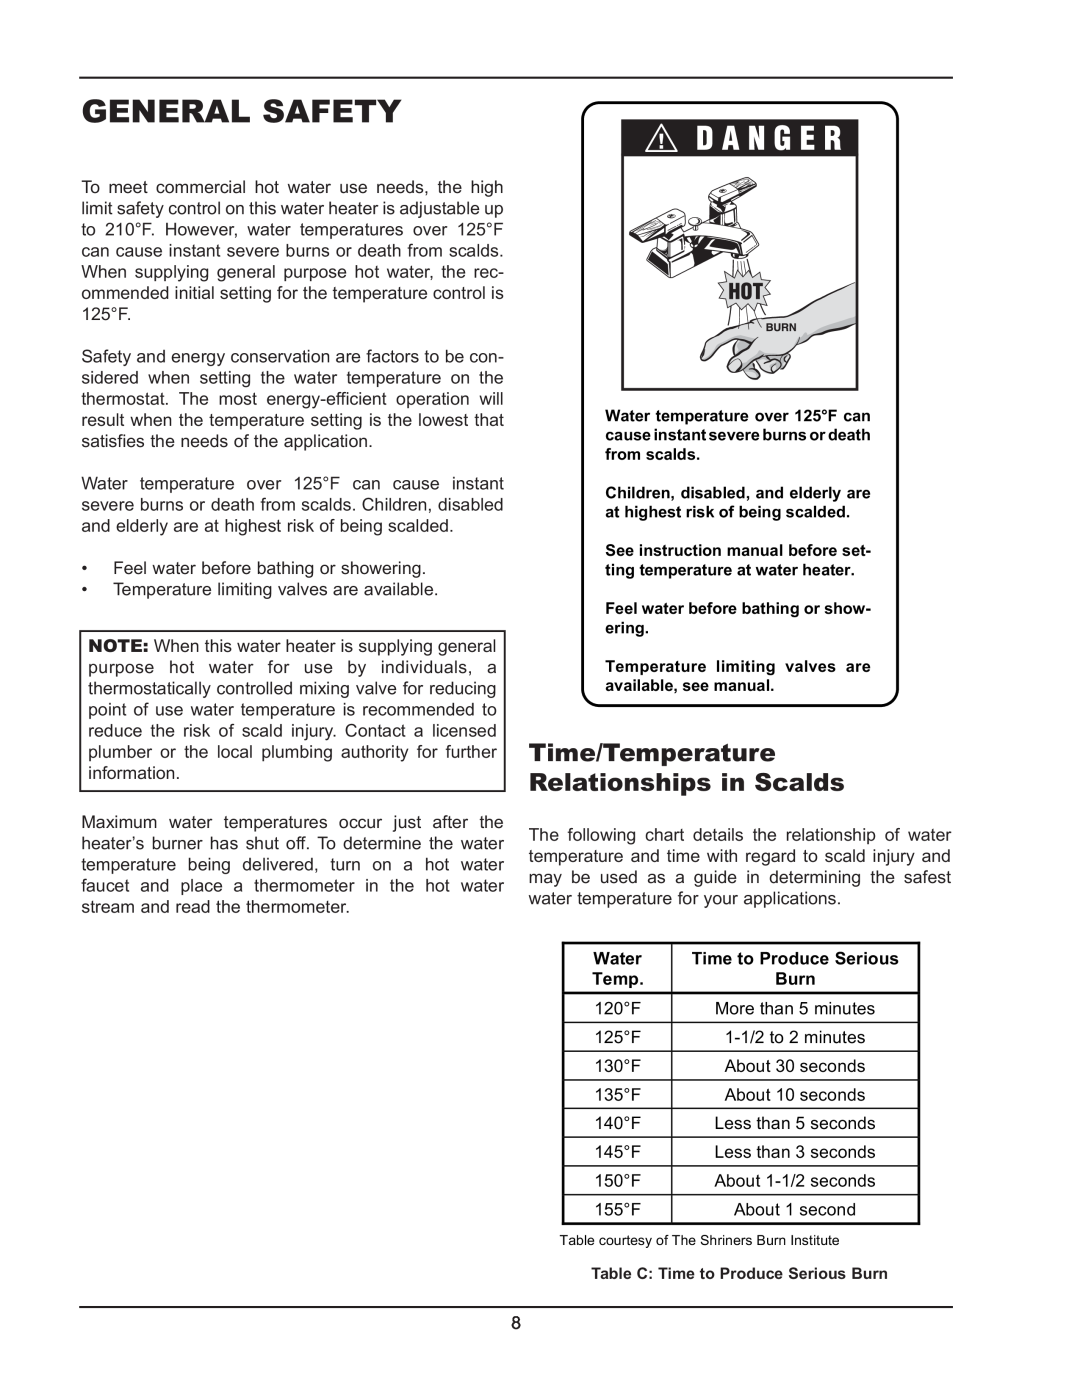 Raypak 399B-2339B operating instructions General Safety, Time/Temperature Relationships in Scalds 